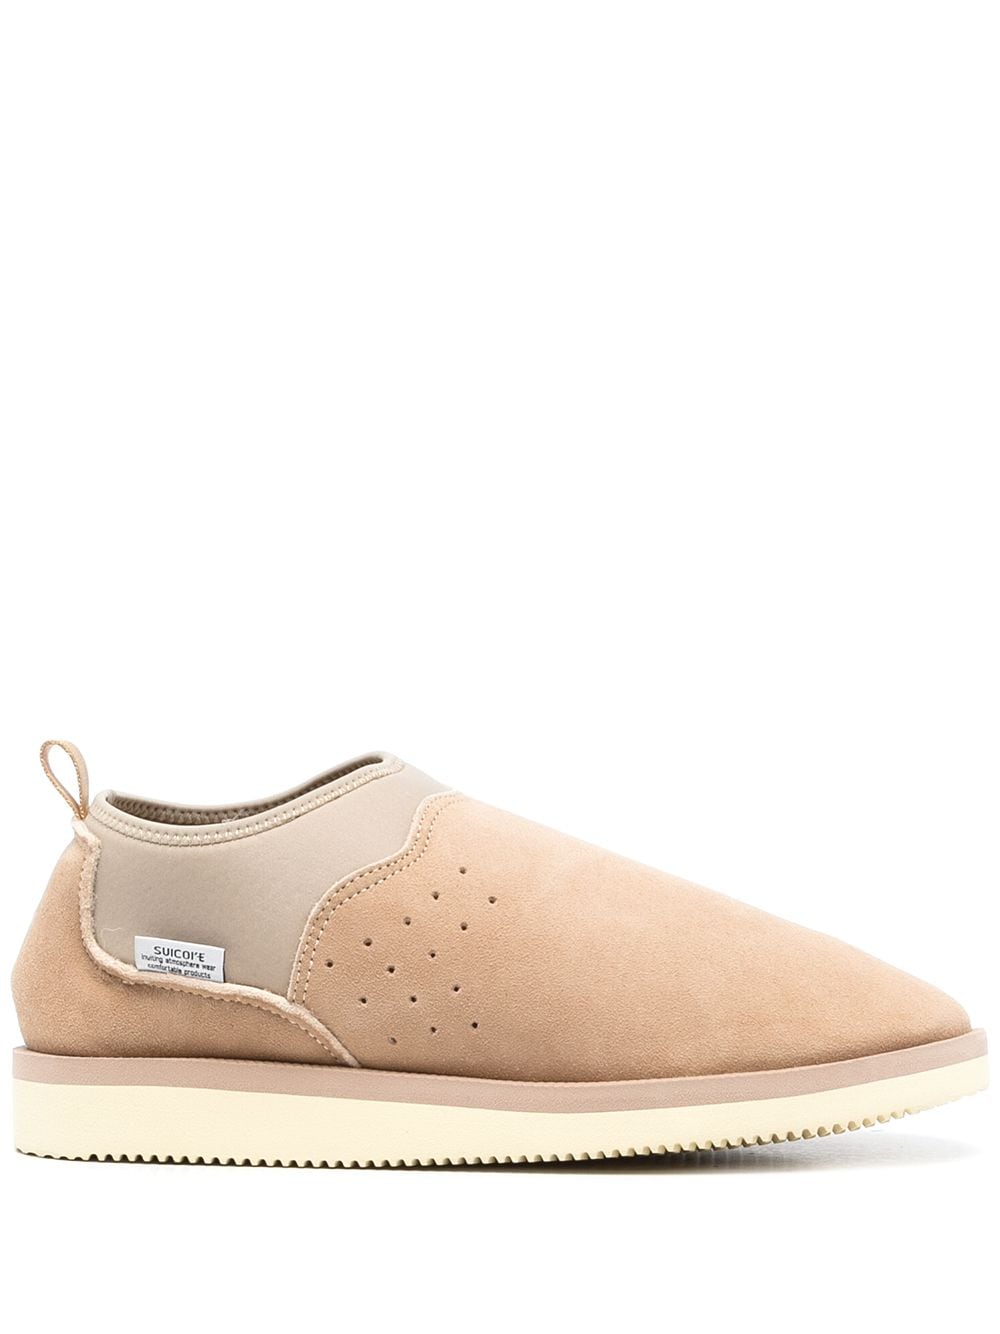 Image 1 of Suicoke Ron suede slippers